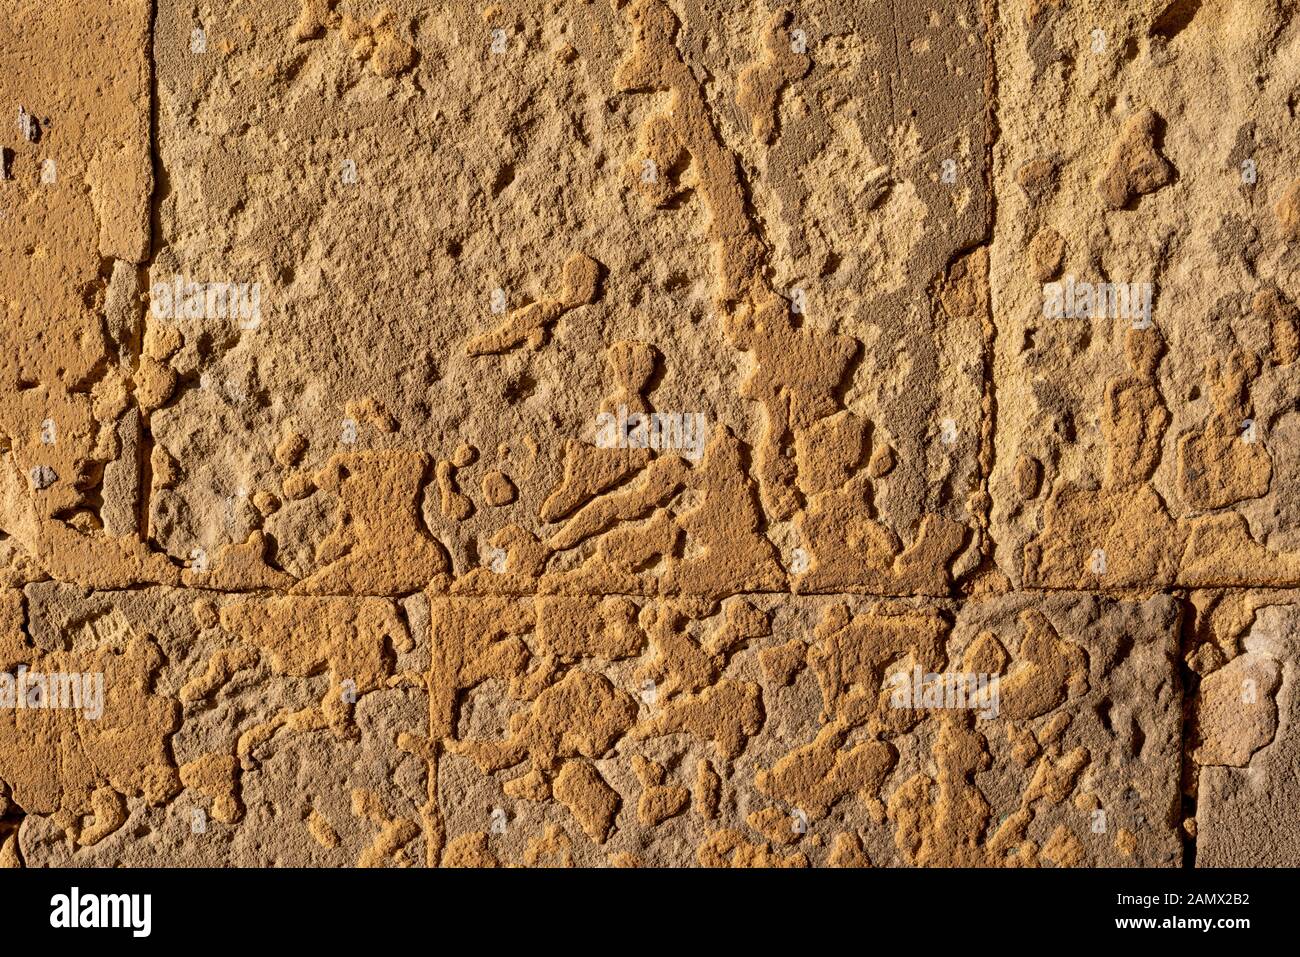 Wall textures of a limestone smooth rock in a building, Old quarter, Alicante city, Spain Stock Photo